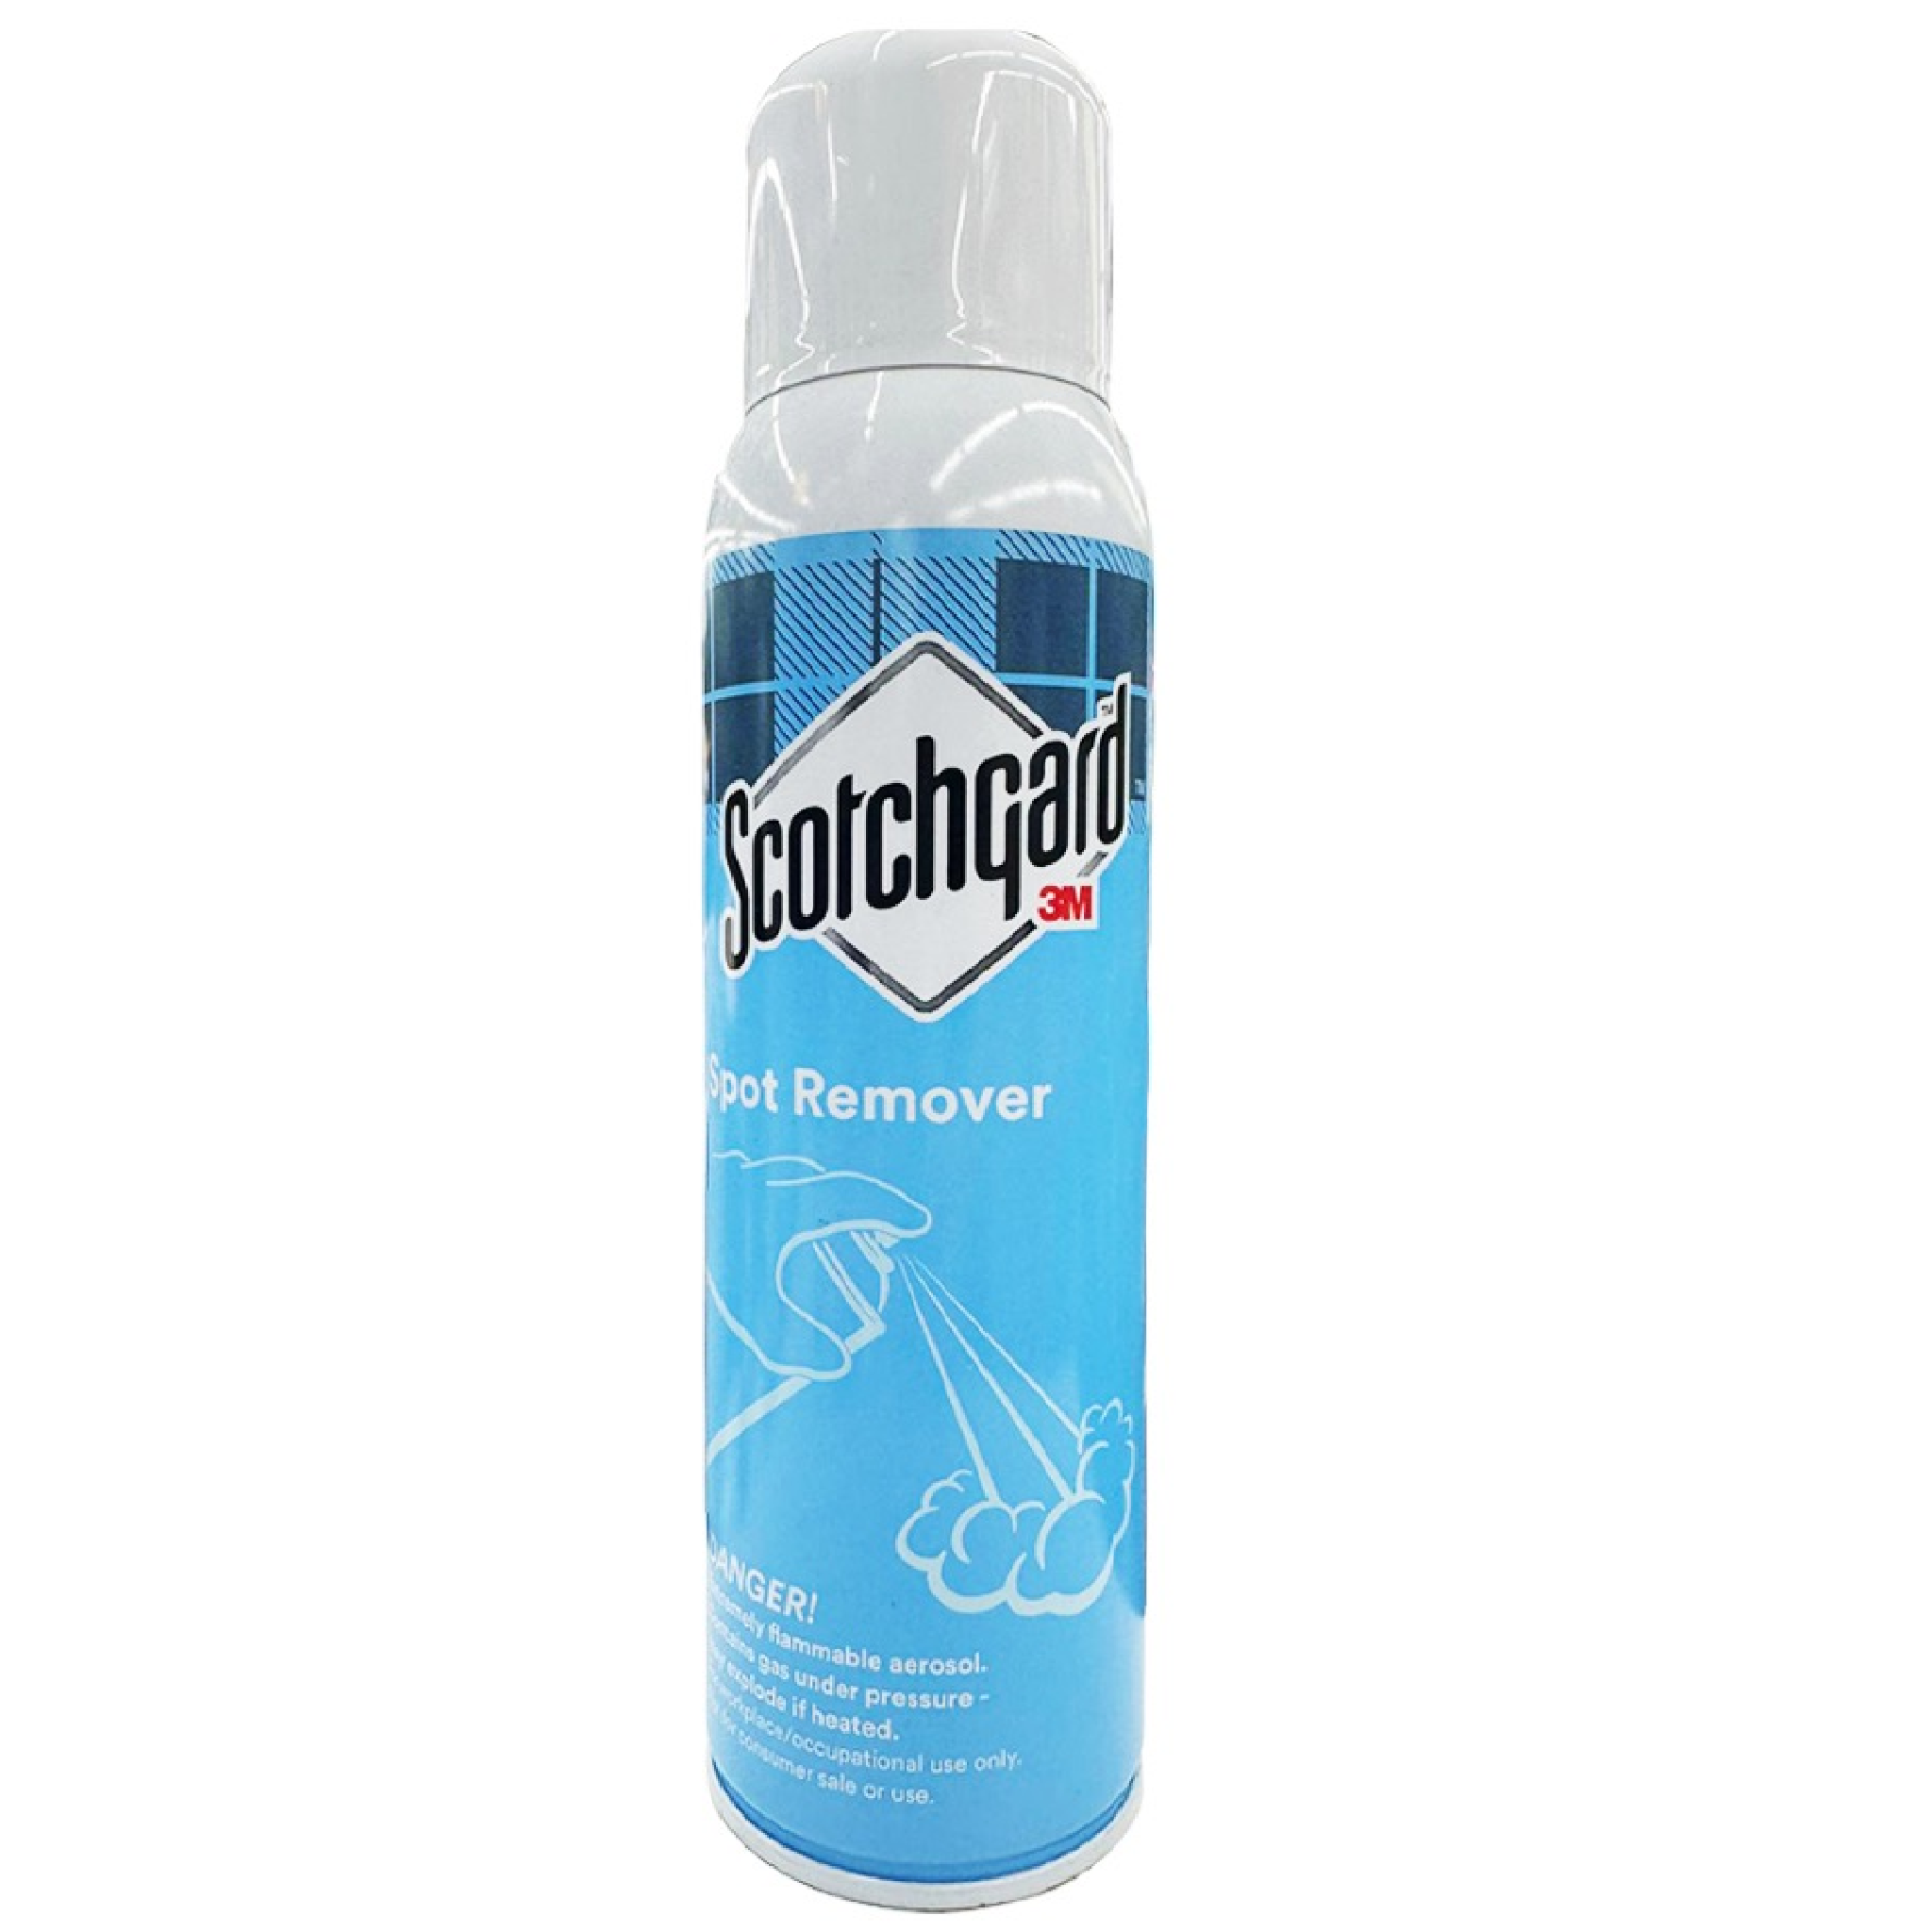 3M Scotchgard Spot Remover And Upholstery Cleaner 17oz